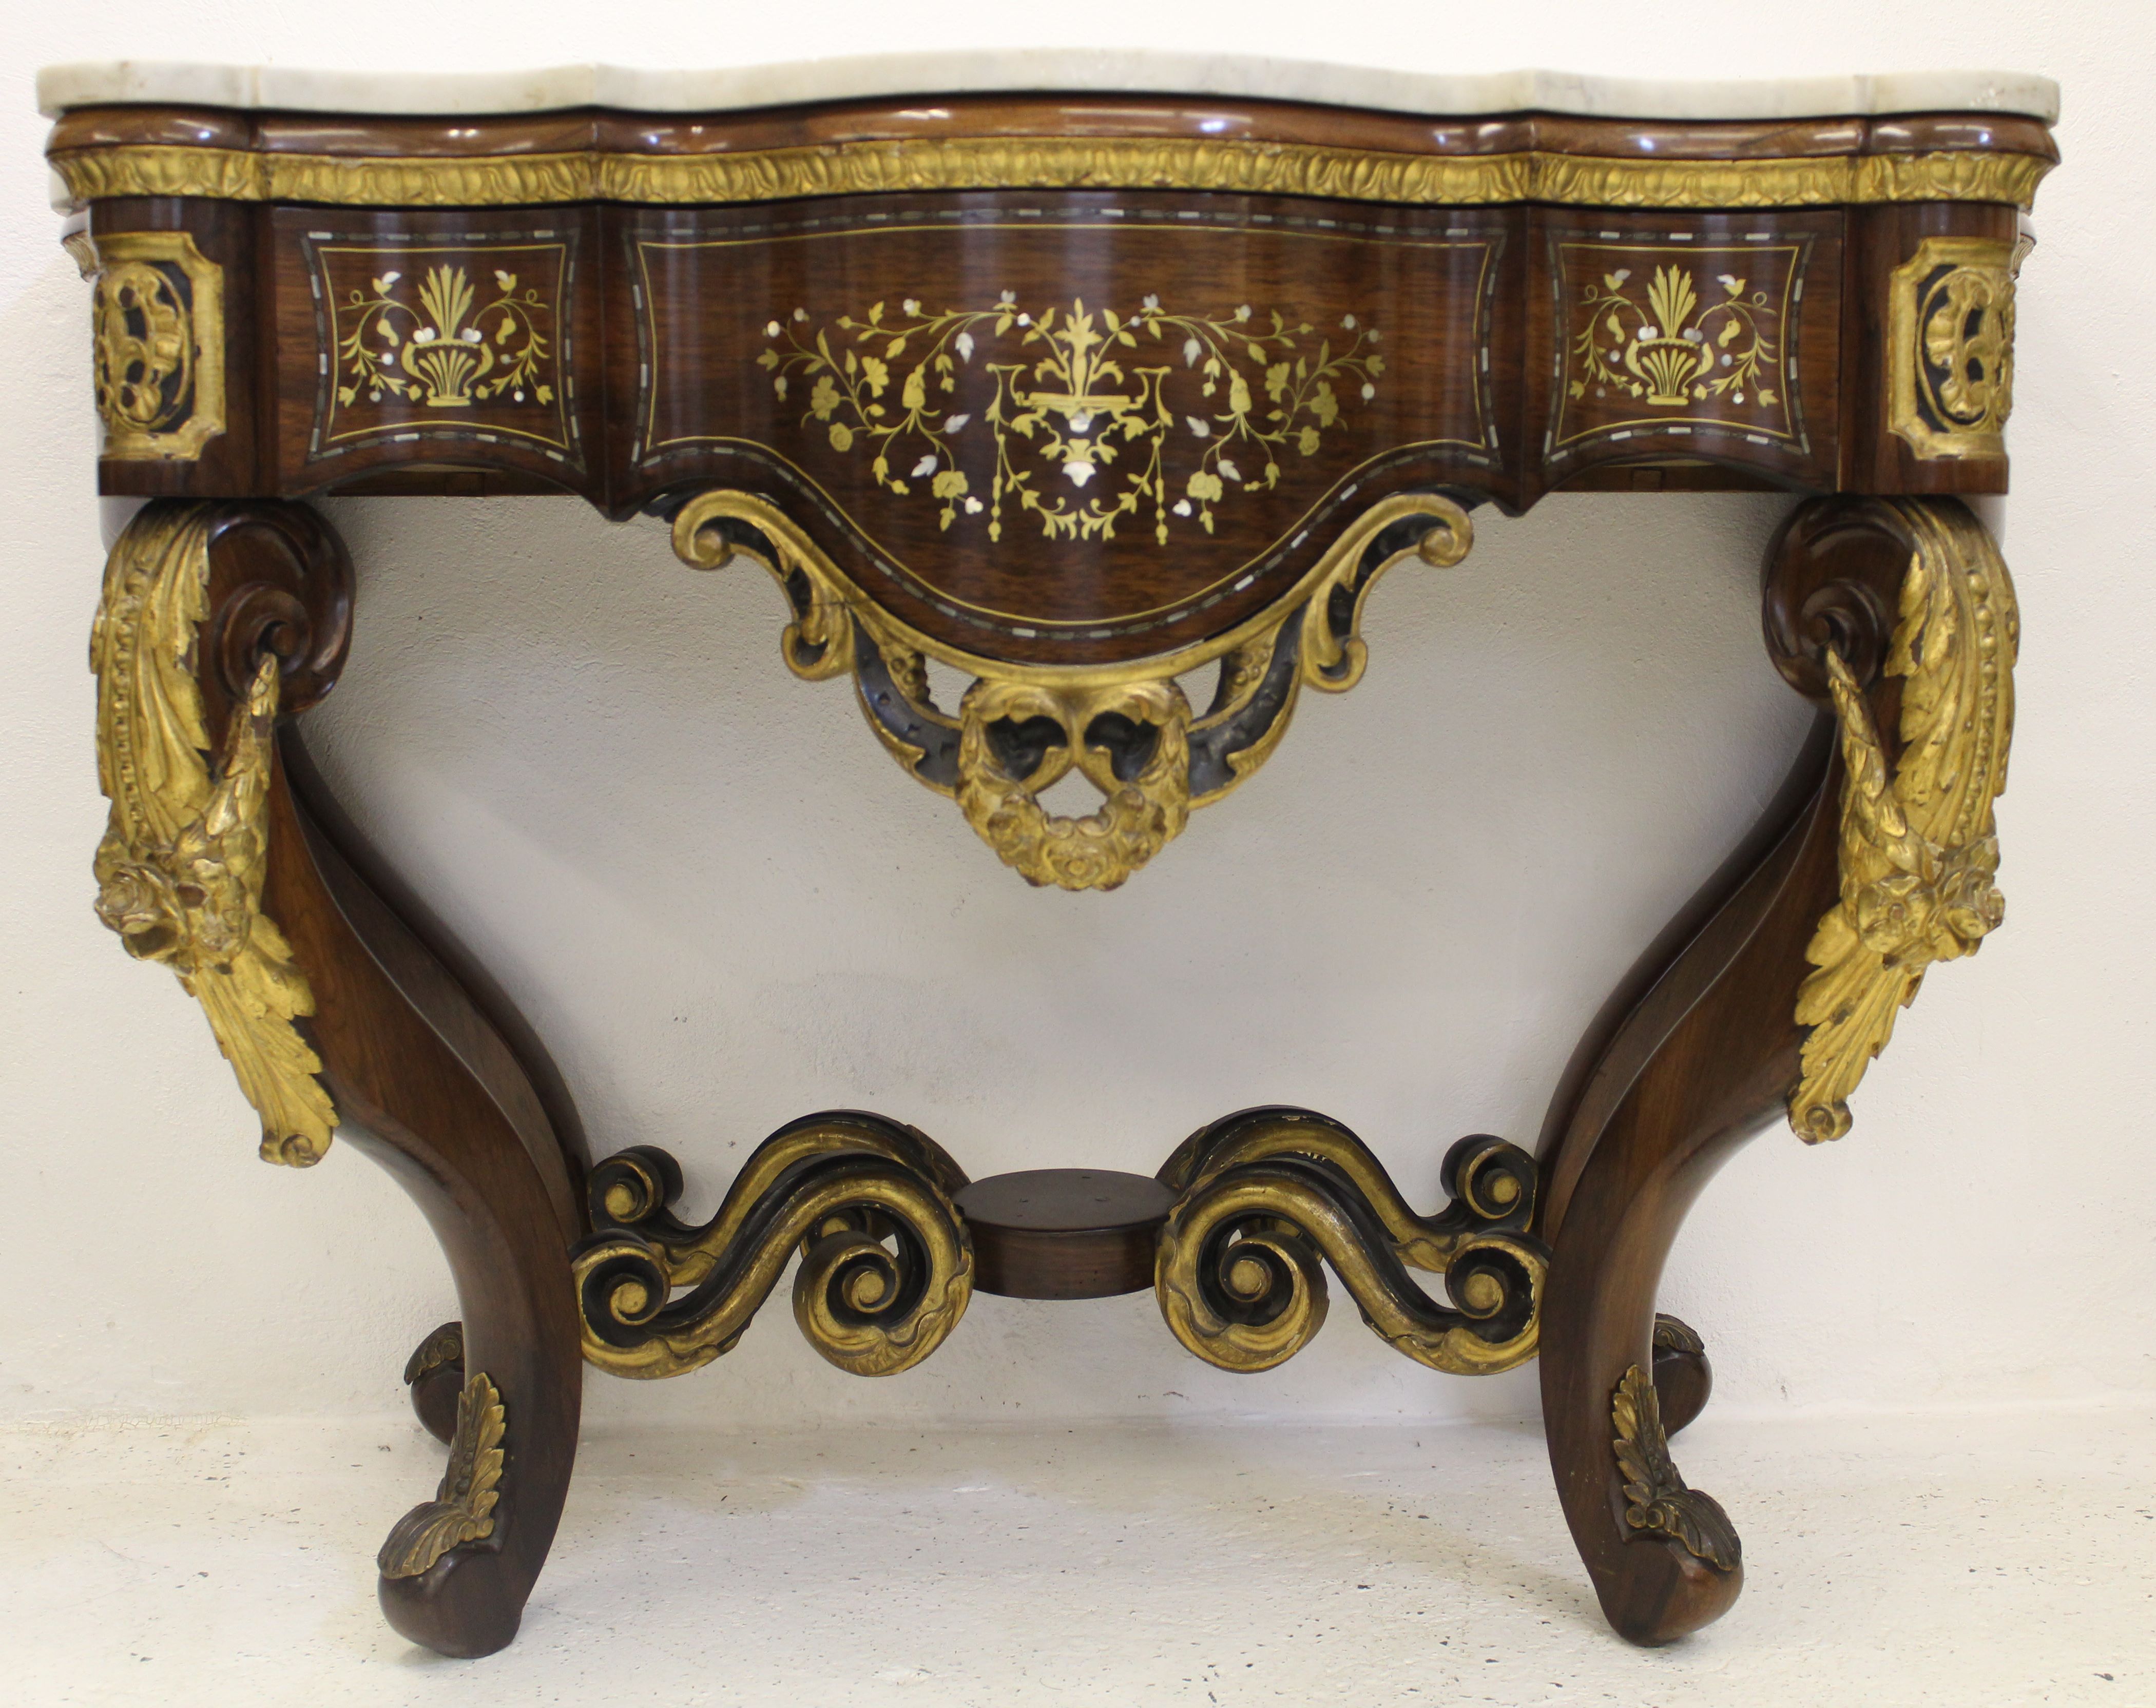 A fine and impressive large 19thC North European commode en console and mirror, c1820, possibly - Image 3 of 12